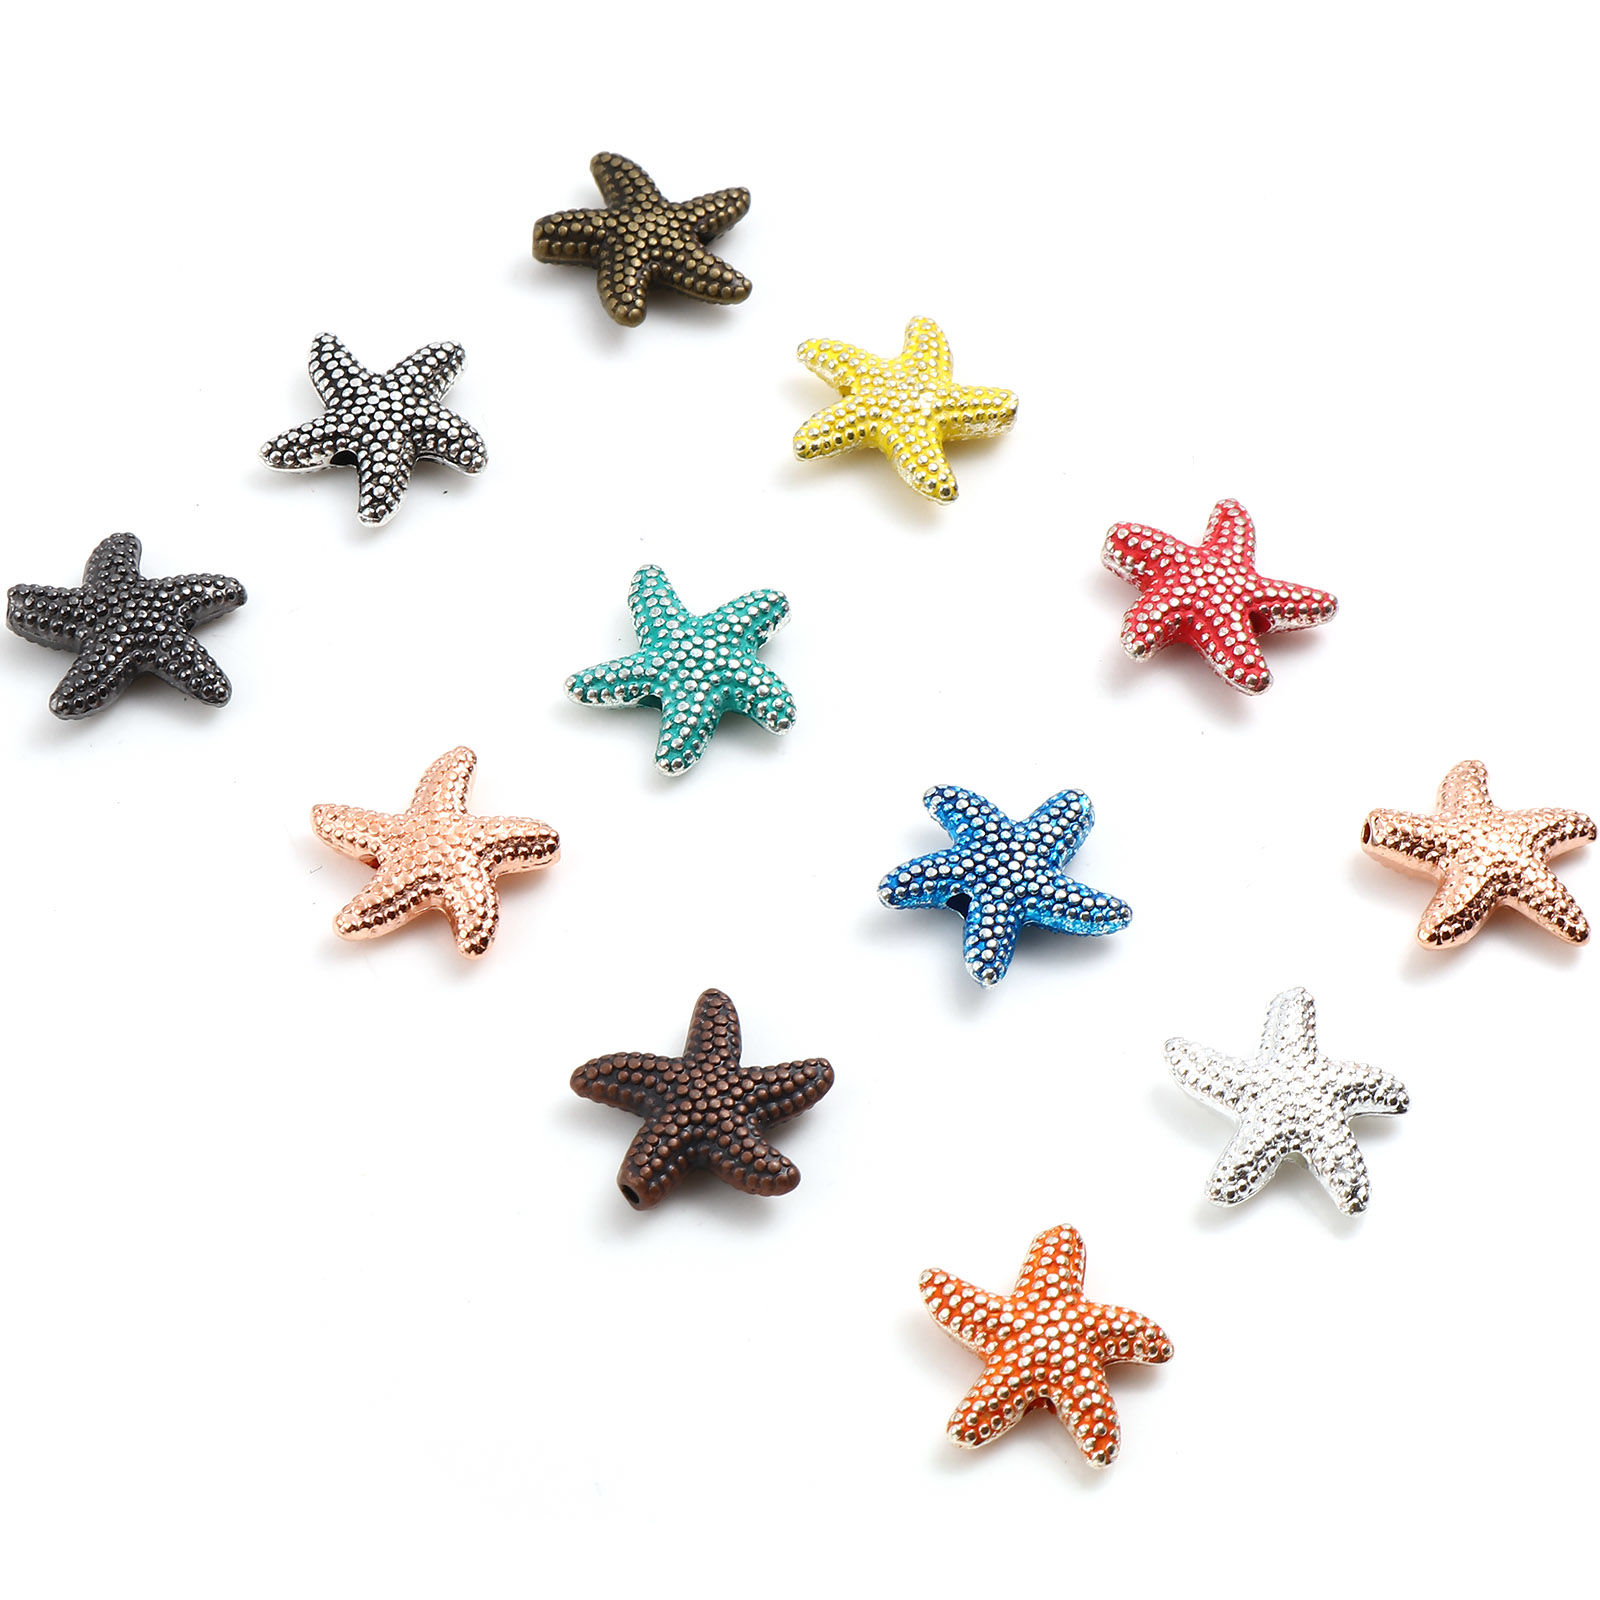 Picture of Zinc Based Alloy Ocean Jewelry Spacer Beads Star Fish Red About 14mm x 13.5mm, Hole: Approx 1.3mm, 20 PCs